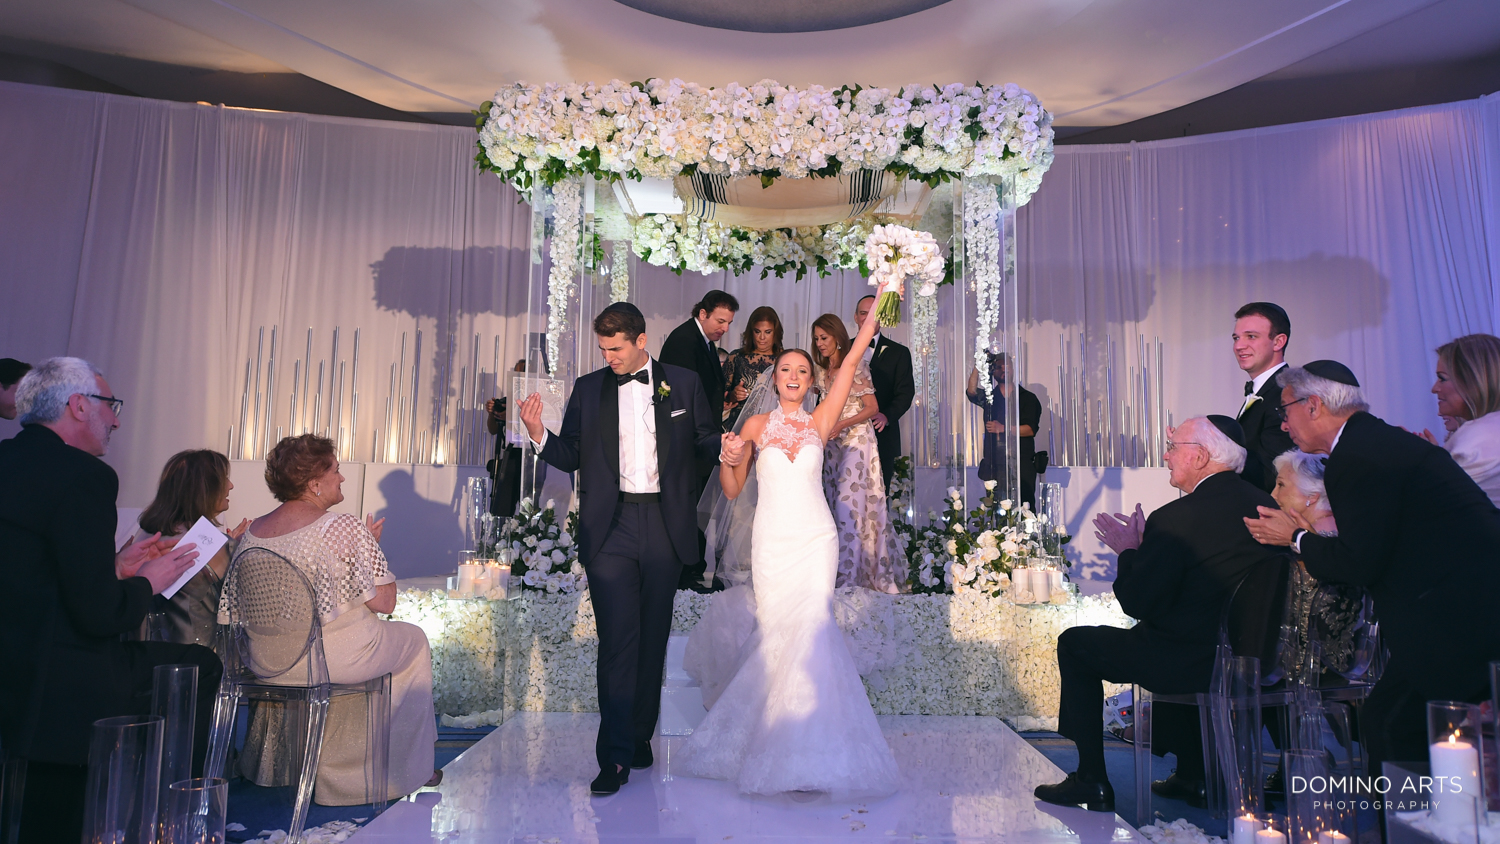 Fun jewish wedding ceremony pictures at fontainebleau miami